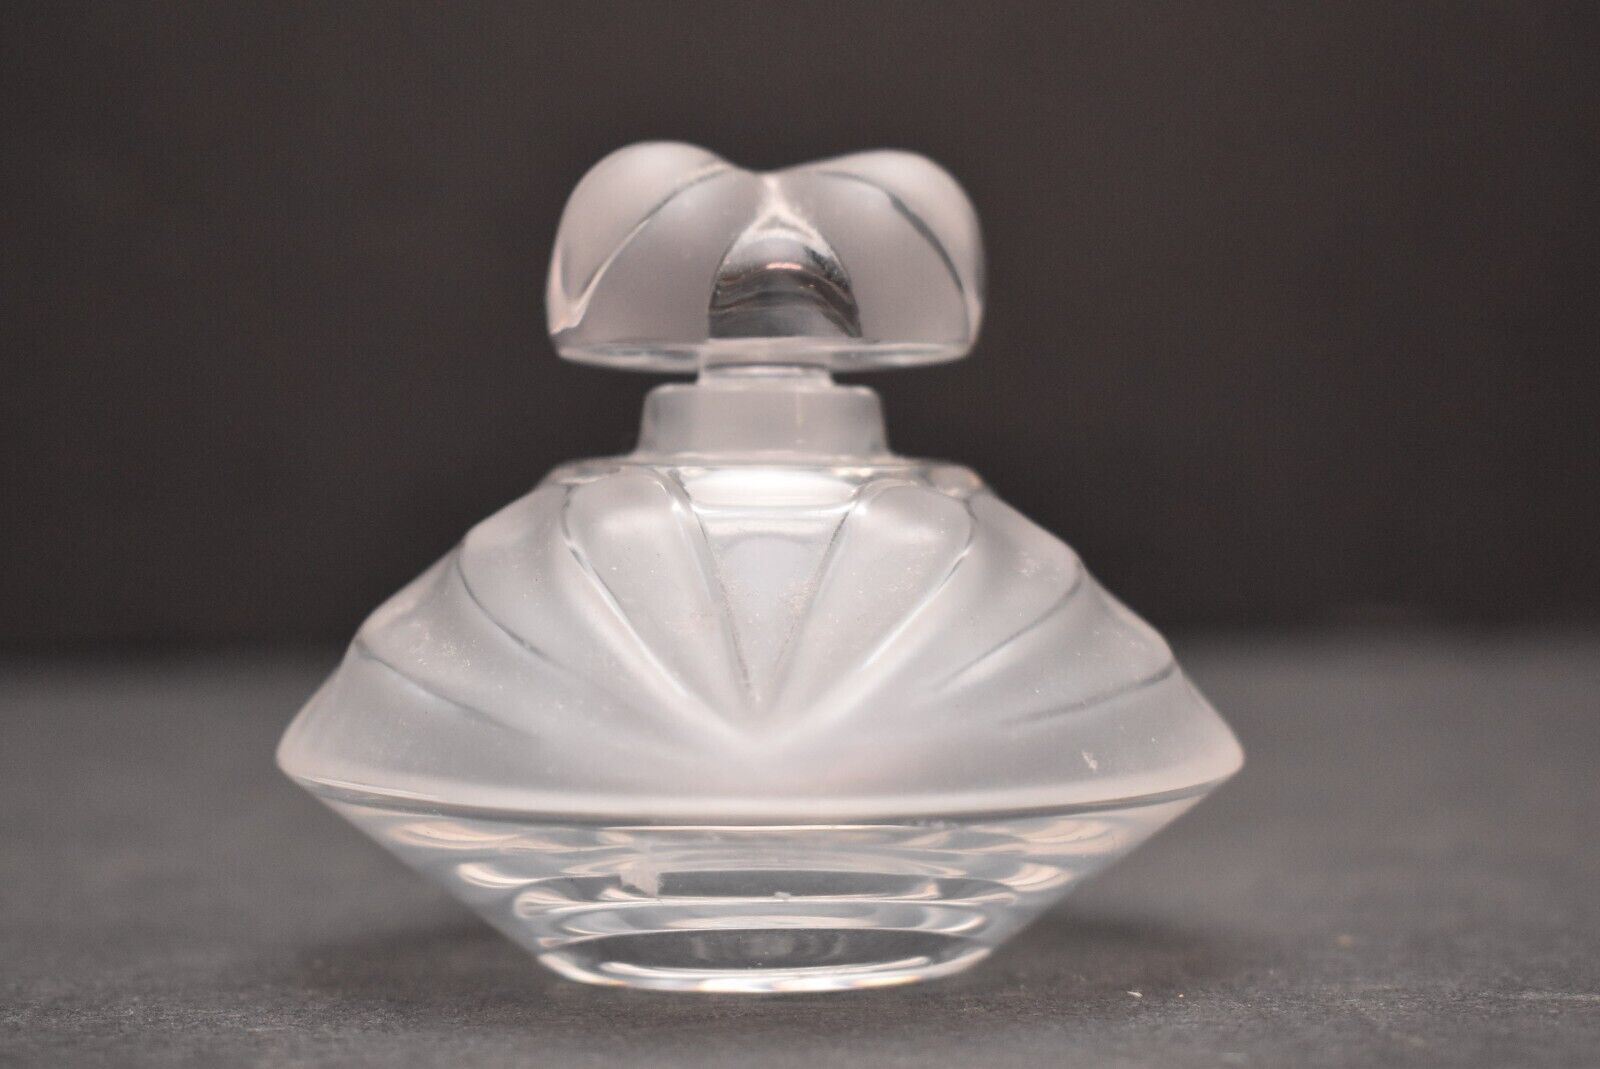 Lalique Perfume Bottle Thais Crystal Frosted Flower Petals Design Beautiful